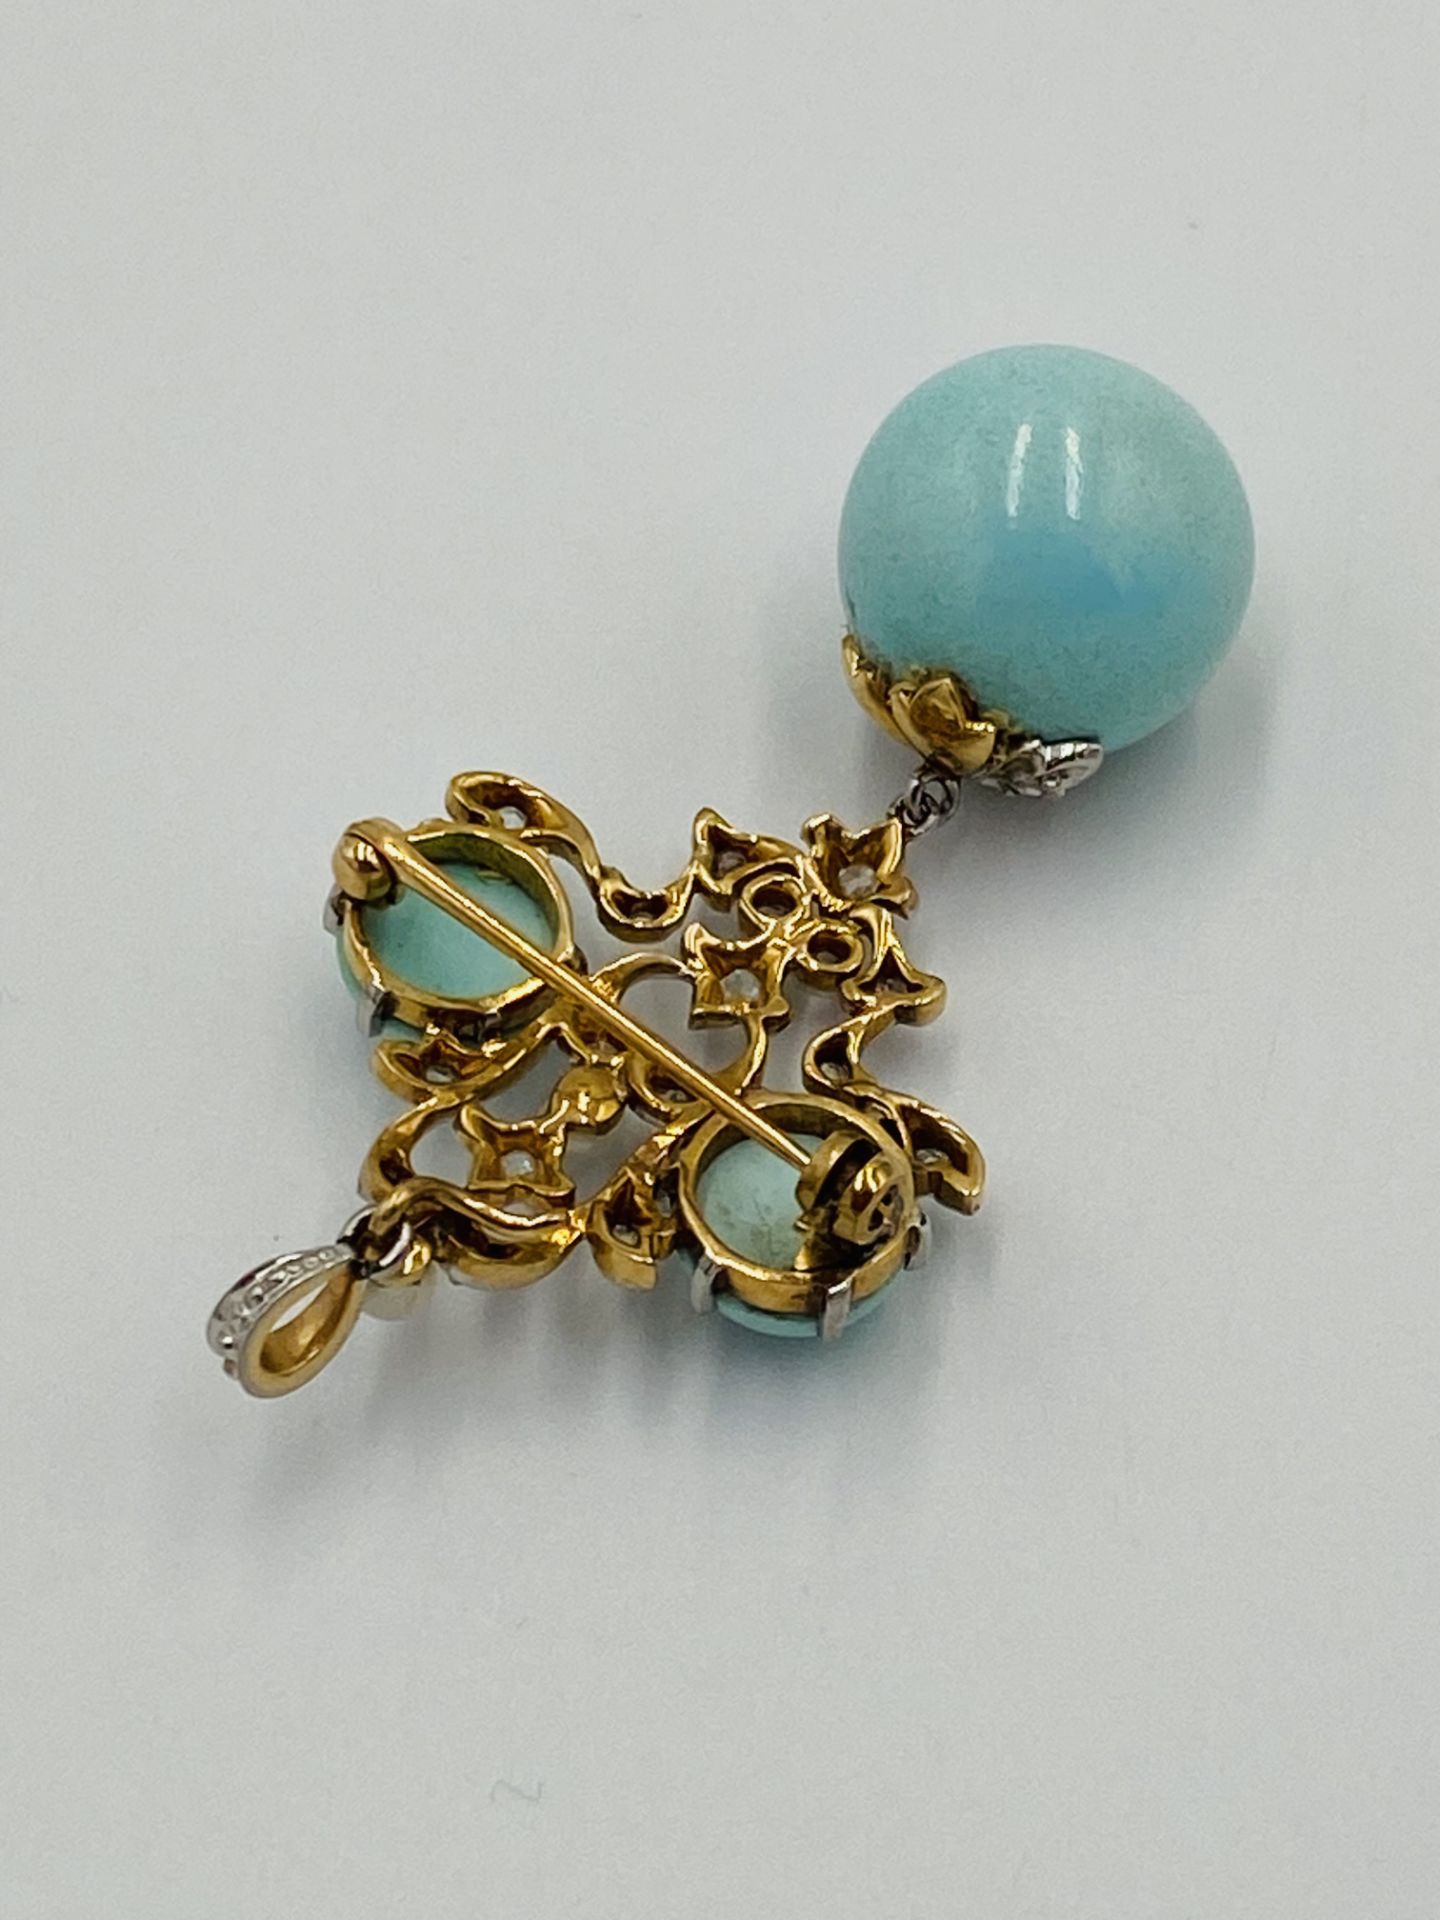 Turquoise and diamond brooch/pendant - Image 4 of 5